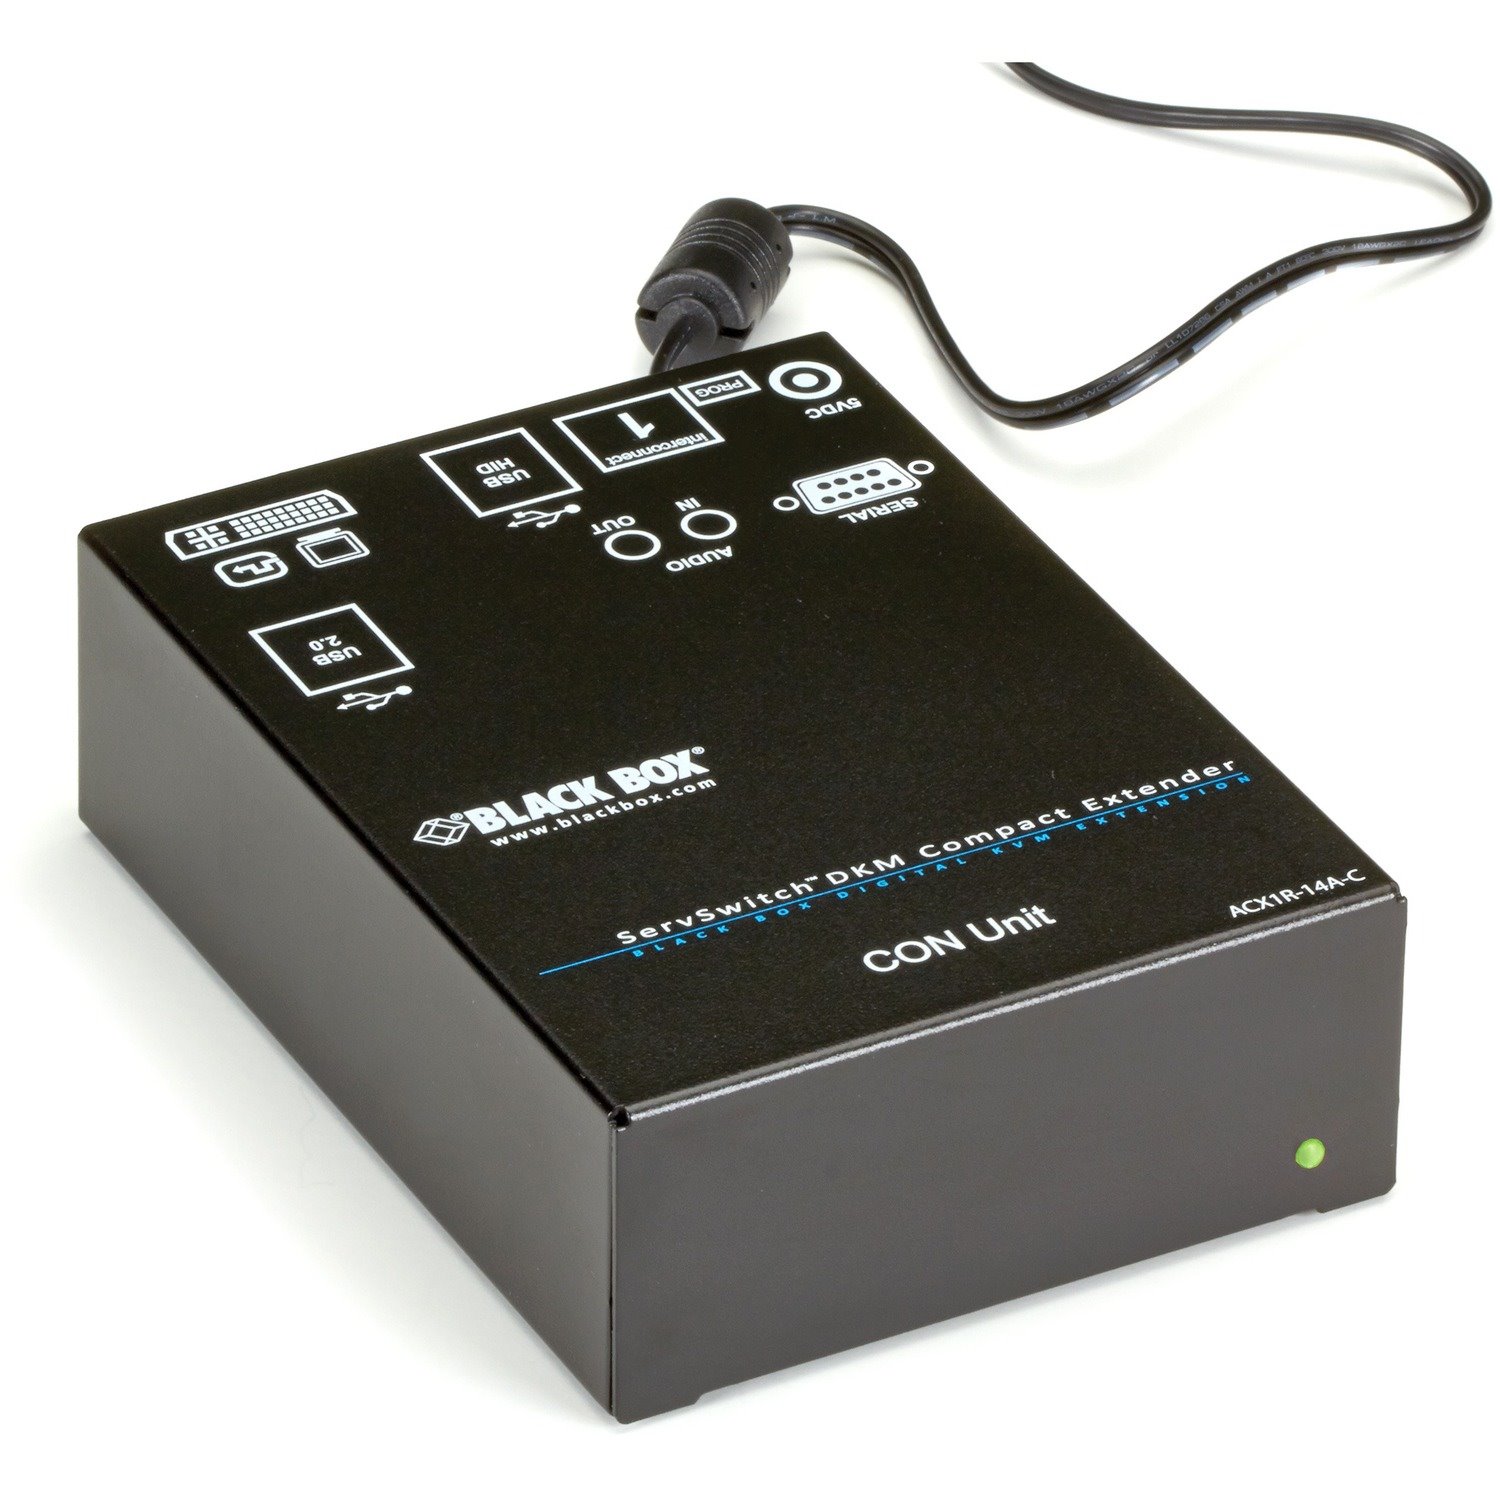 Black Box DKM FX Compact Receiver, CATx, DVI, USB, RS-232, Audio, And USB 2.0 At 36 Mbps